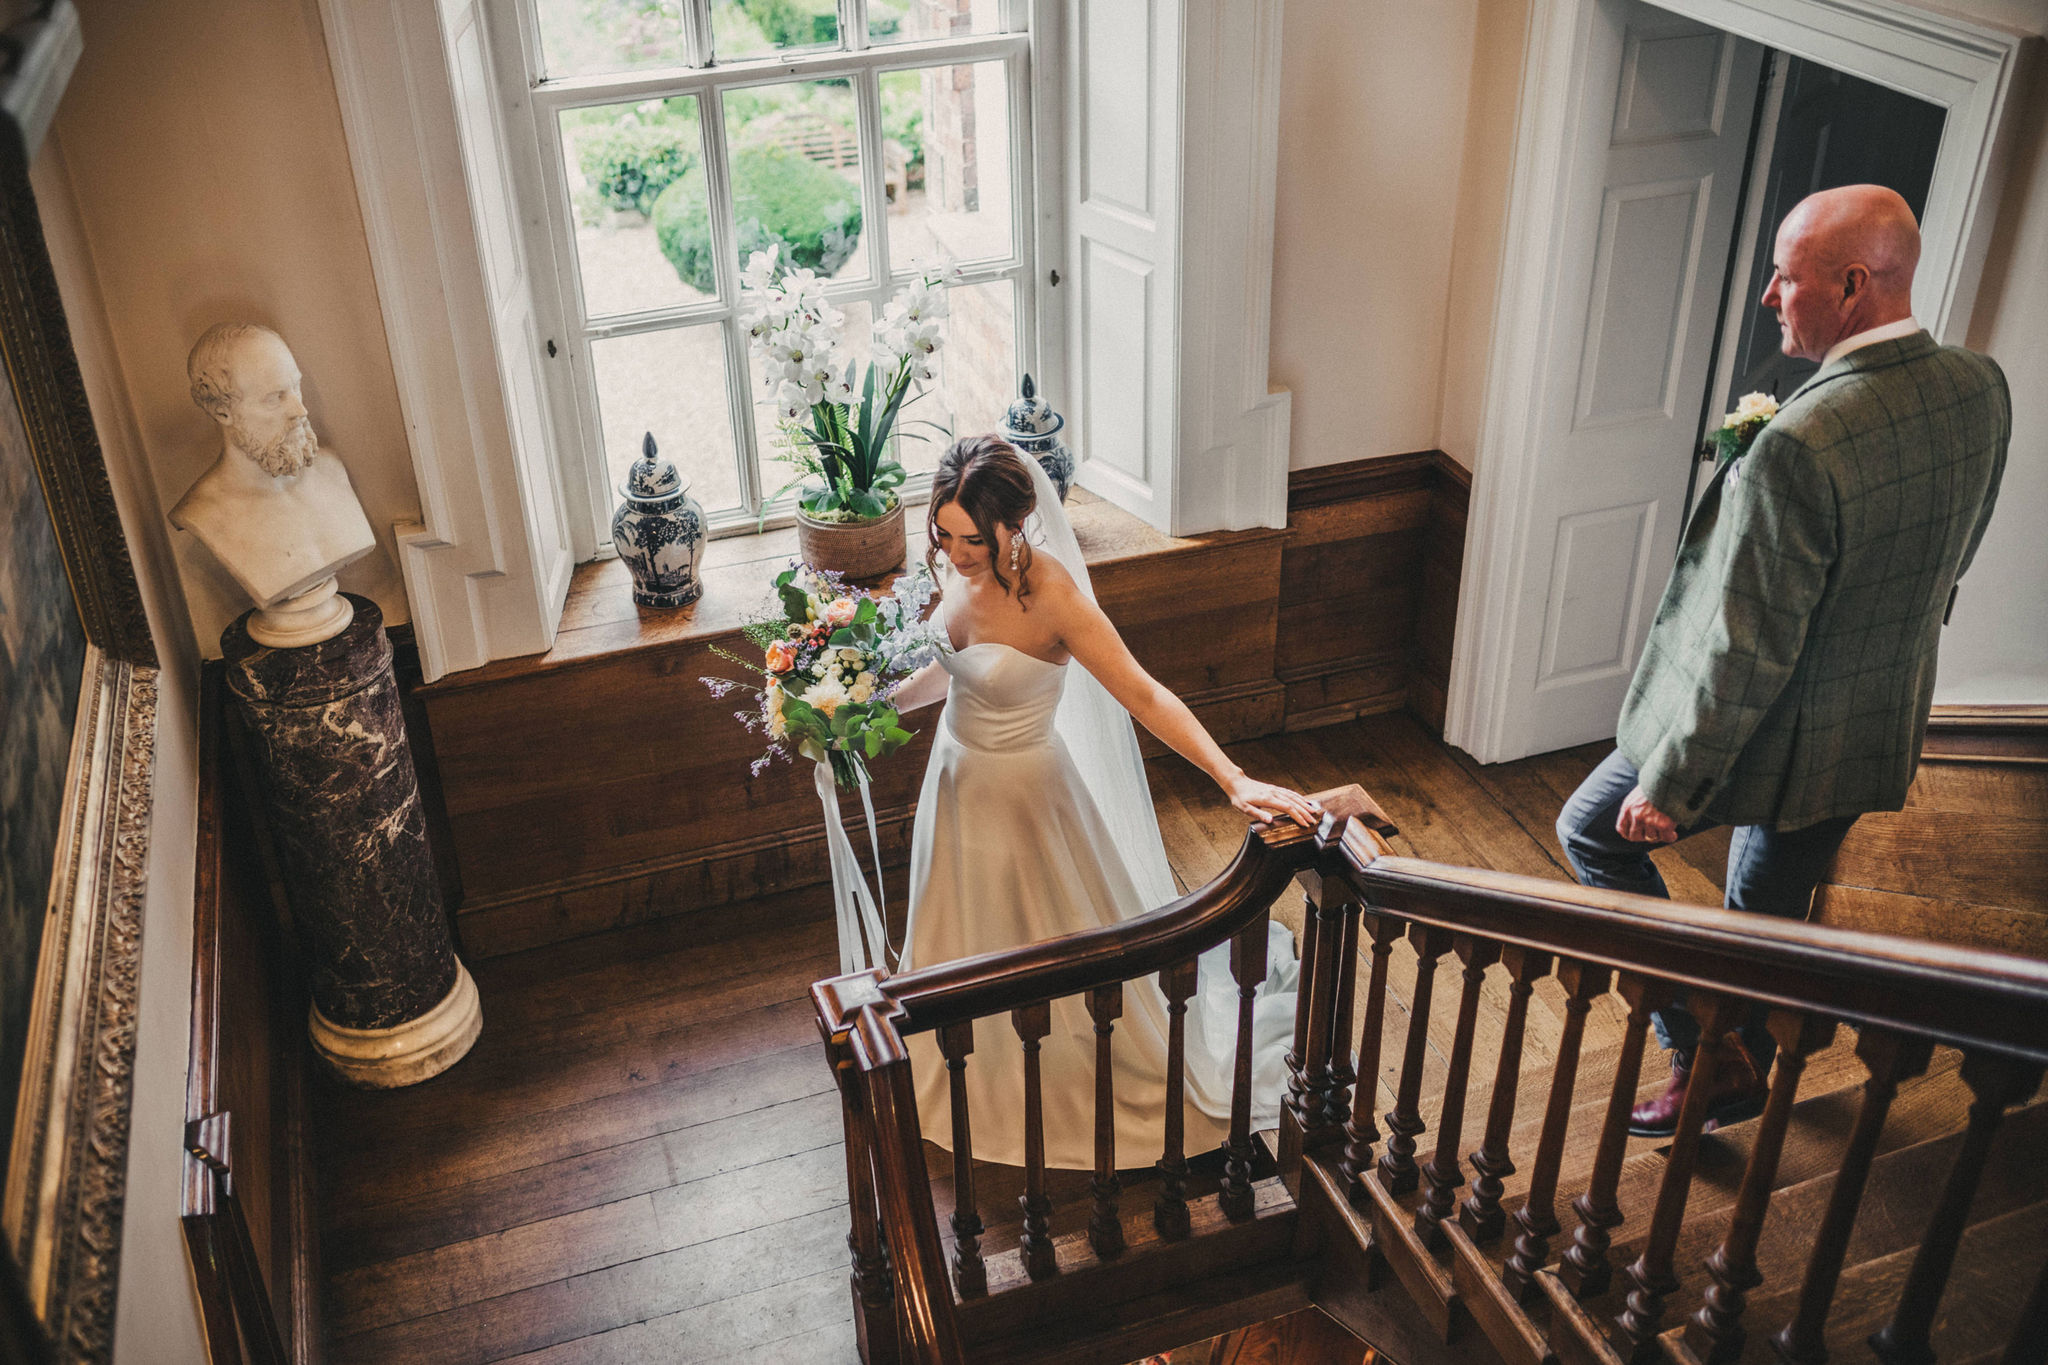 A bride descends an ornate wooden antique staircase holding a pastel coloured bouquet of flowers